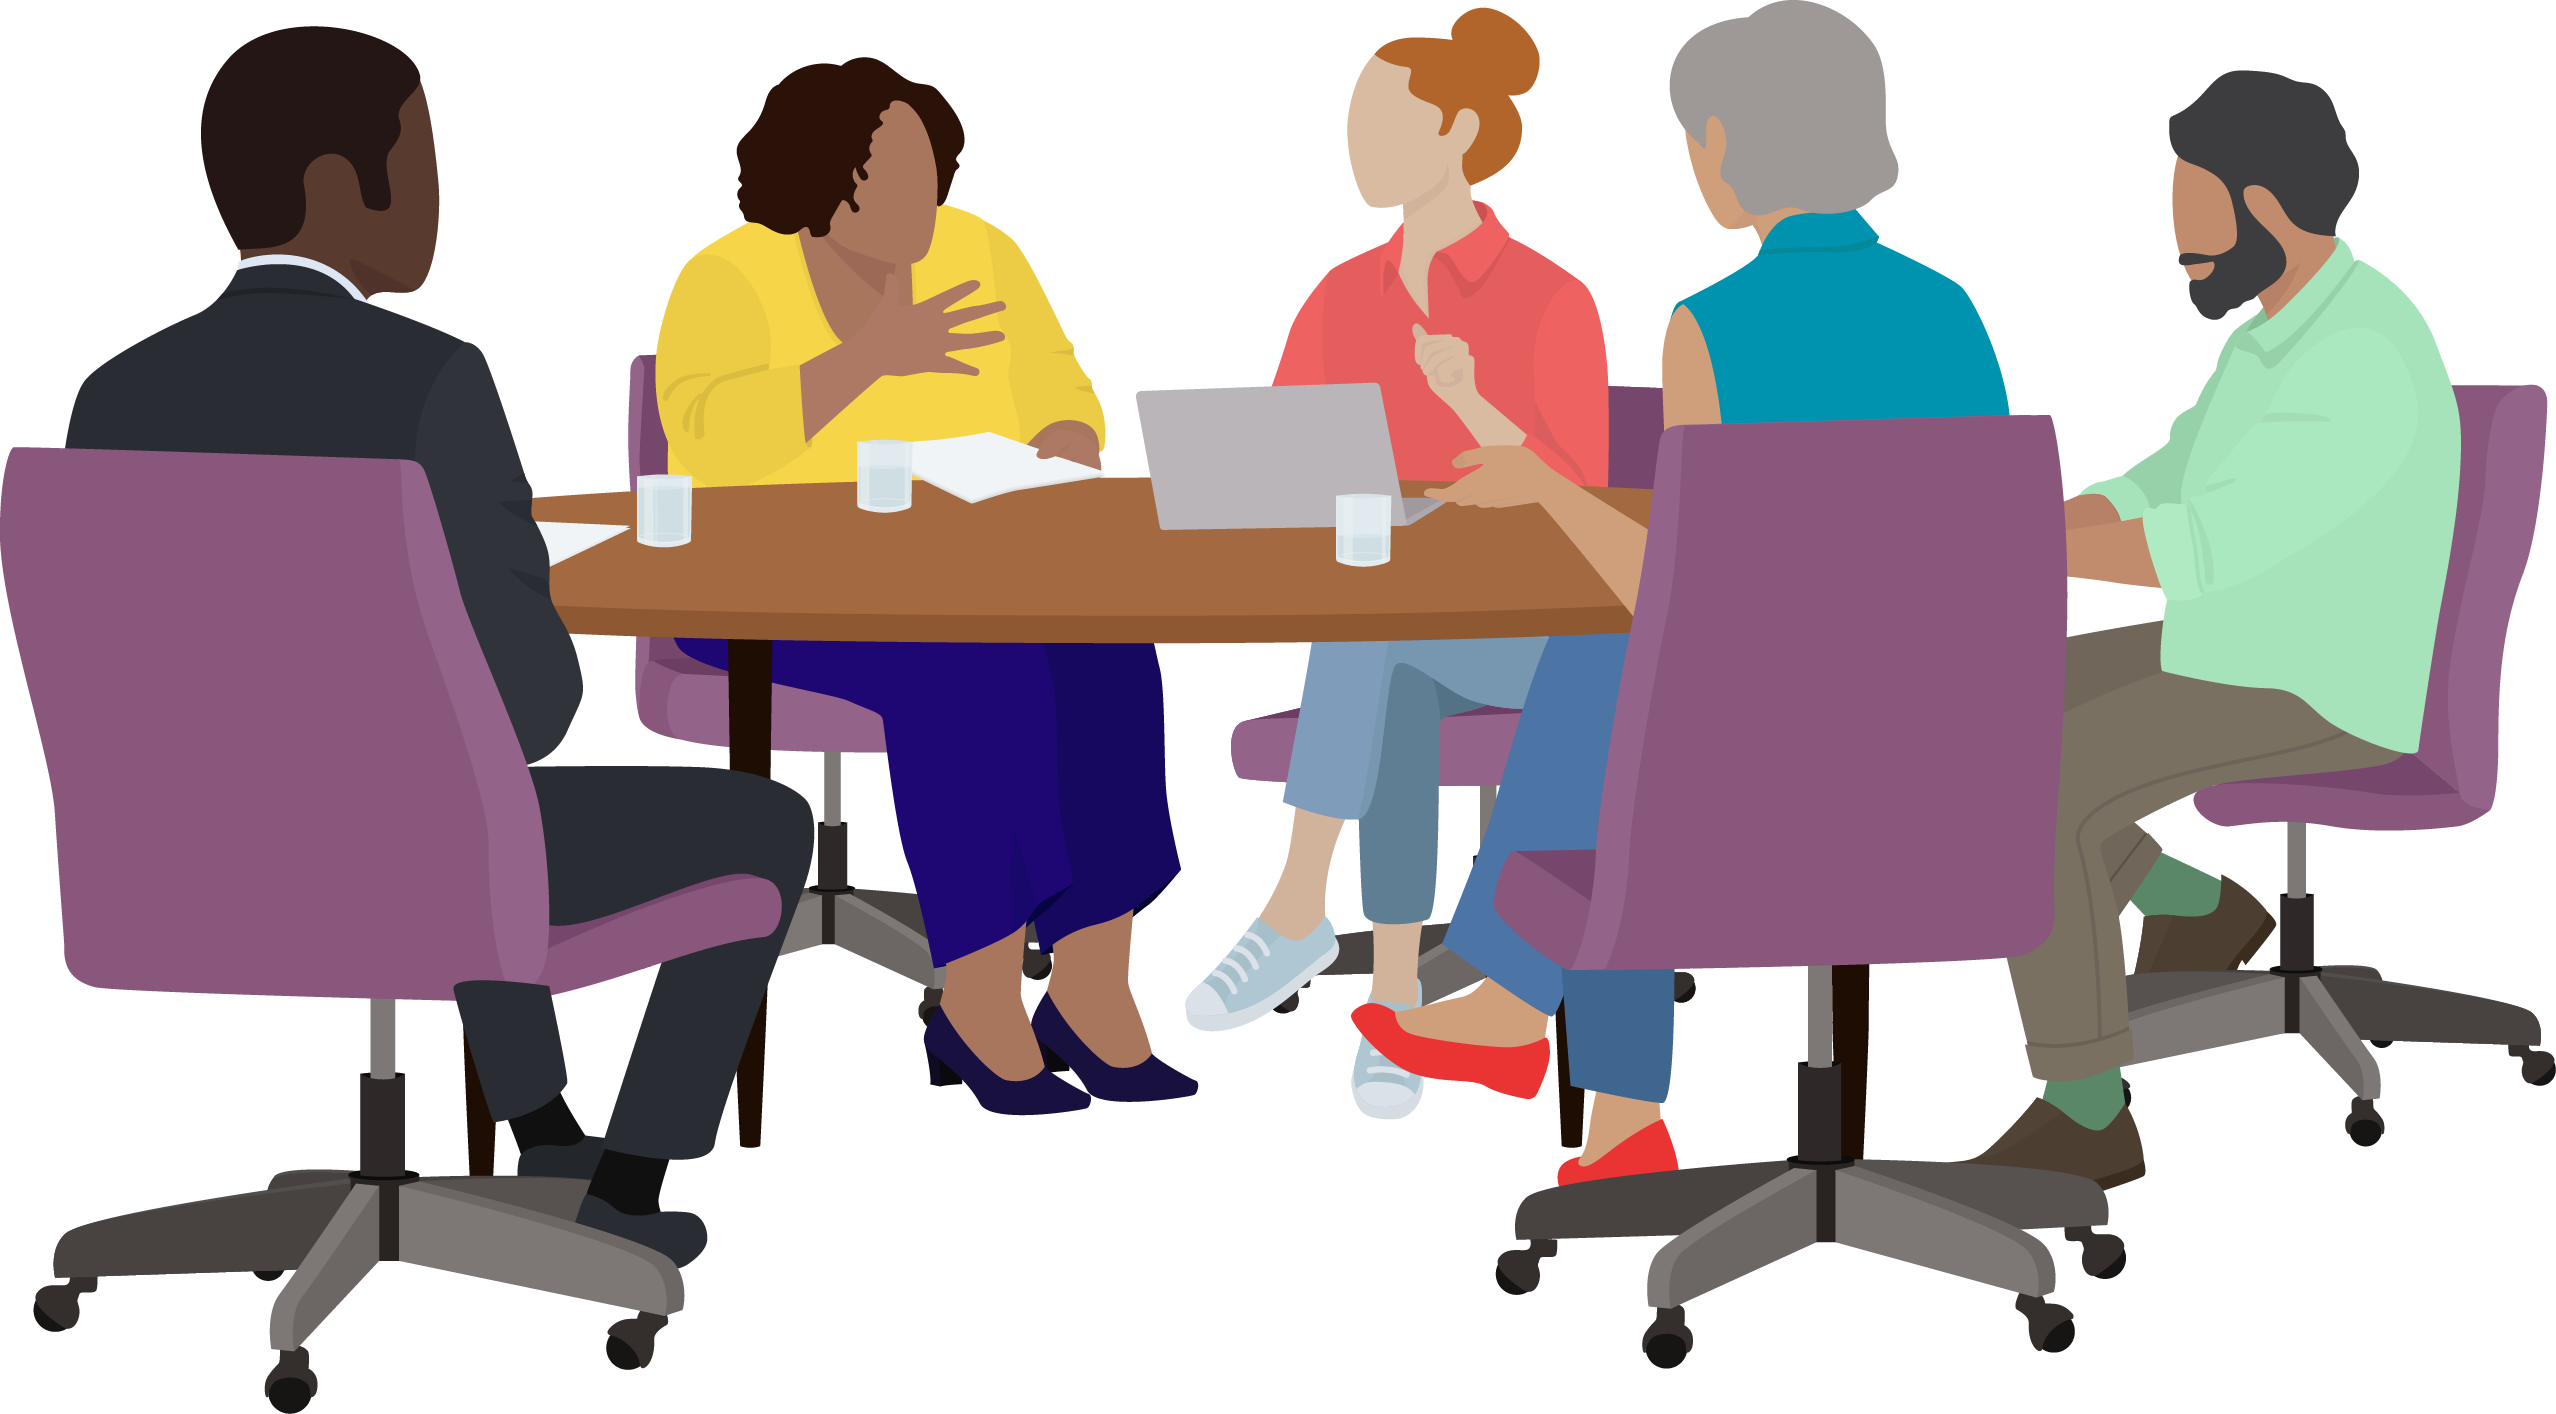 Illustration of diverse group of adults having a discussion around a conference table.